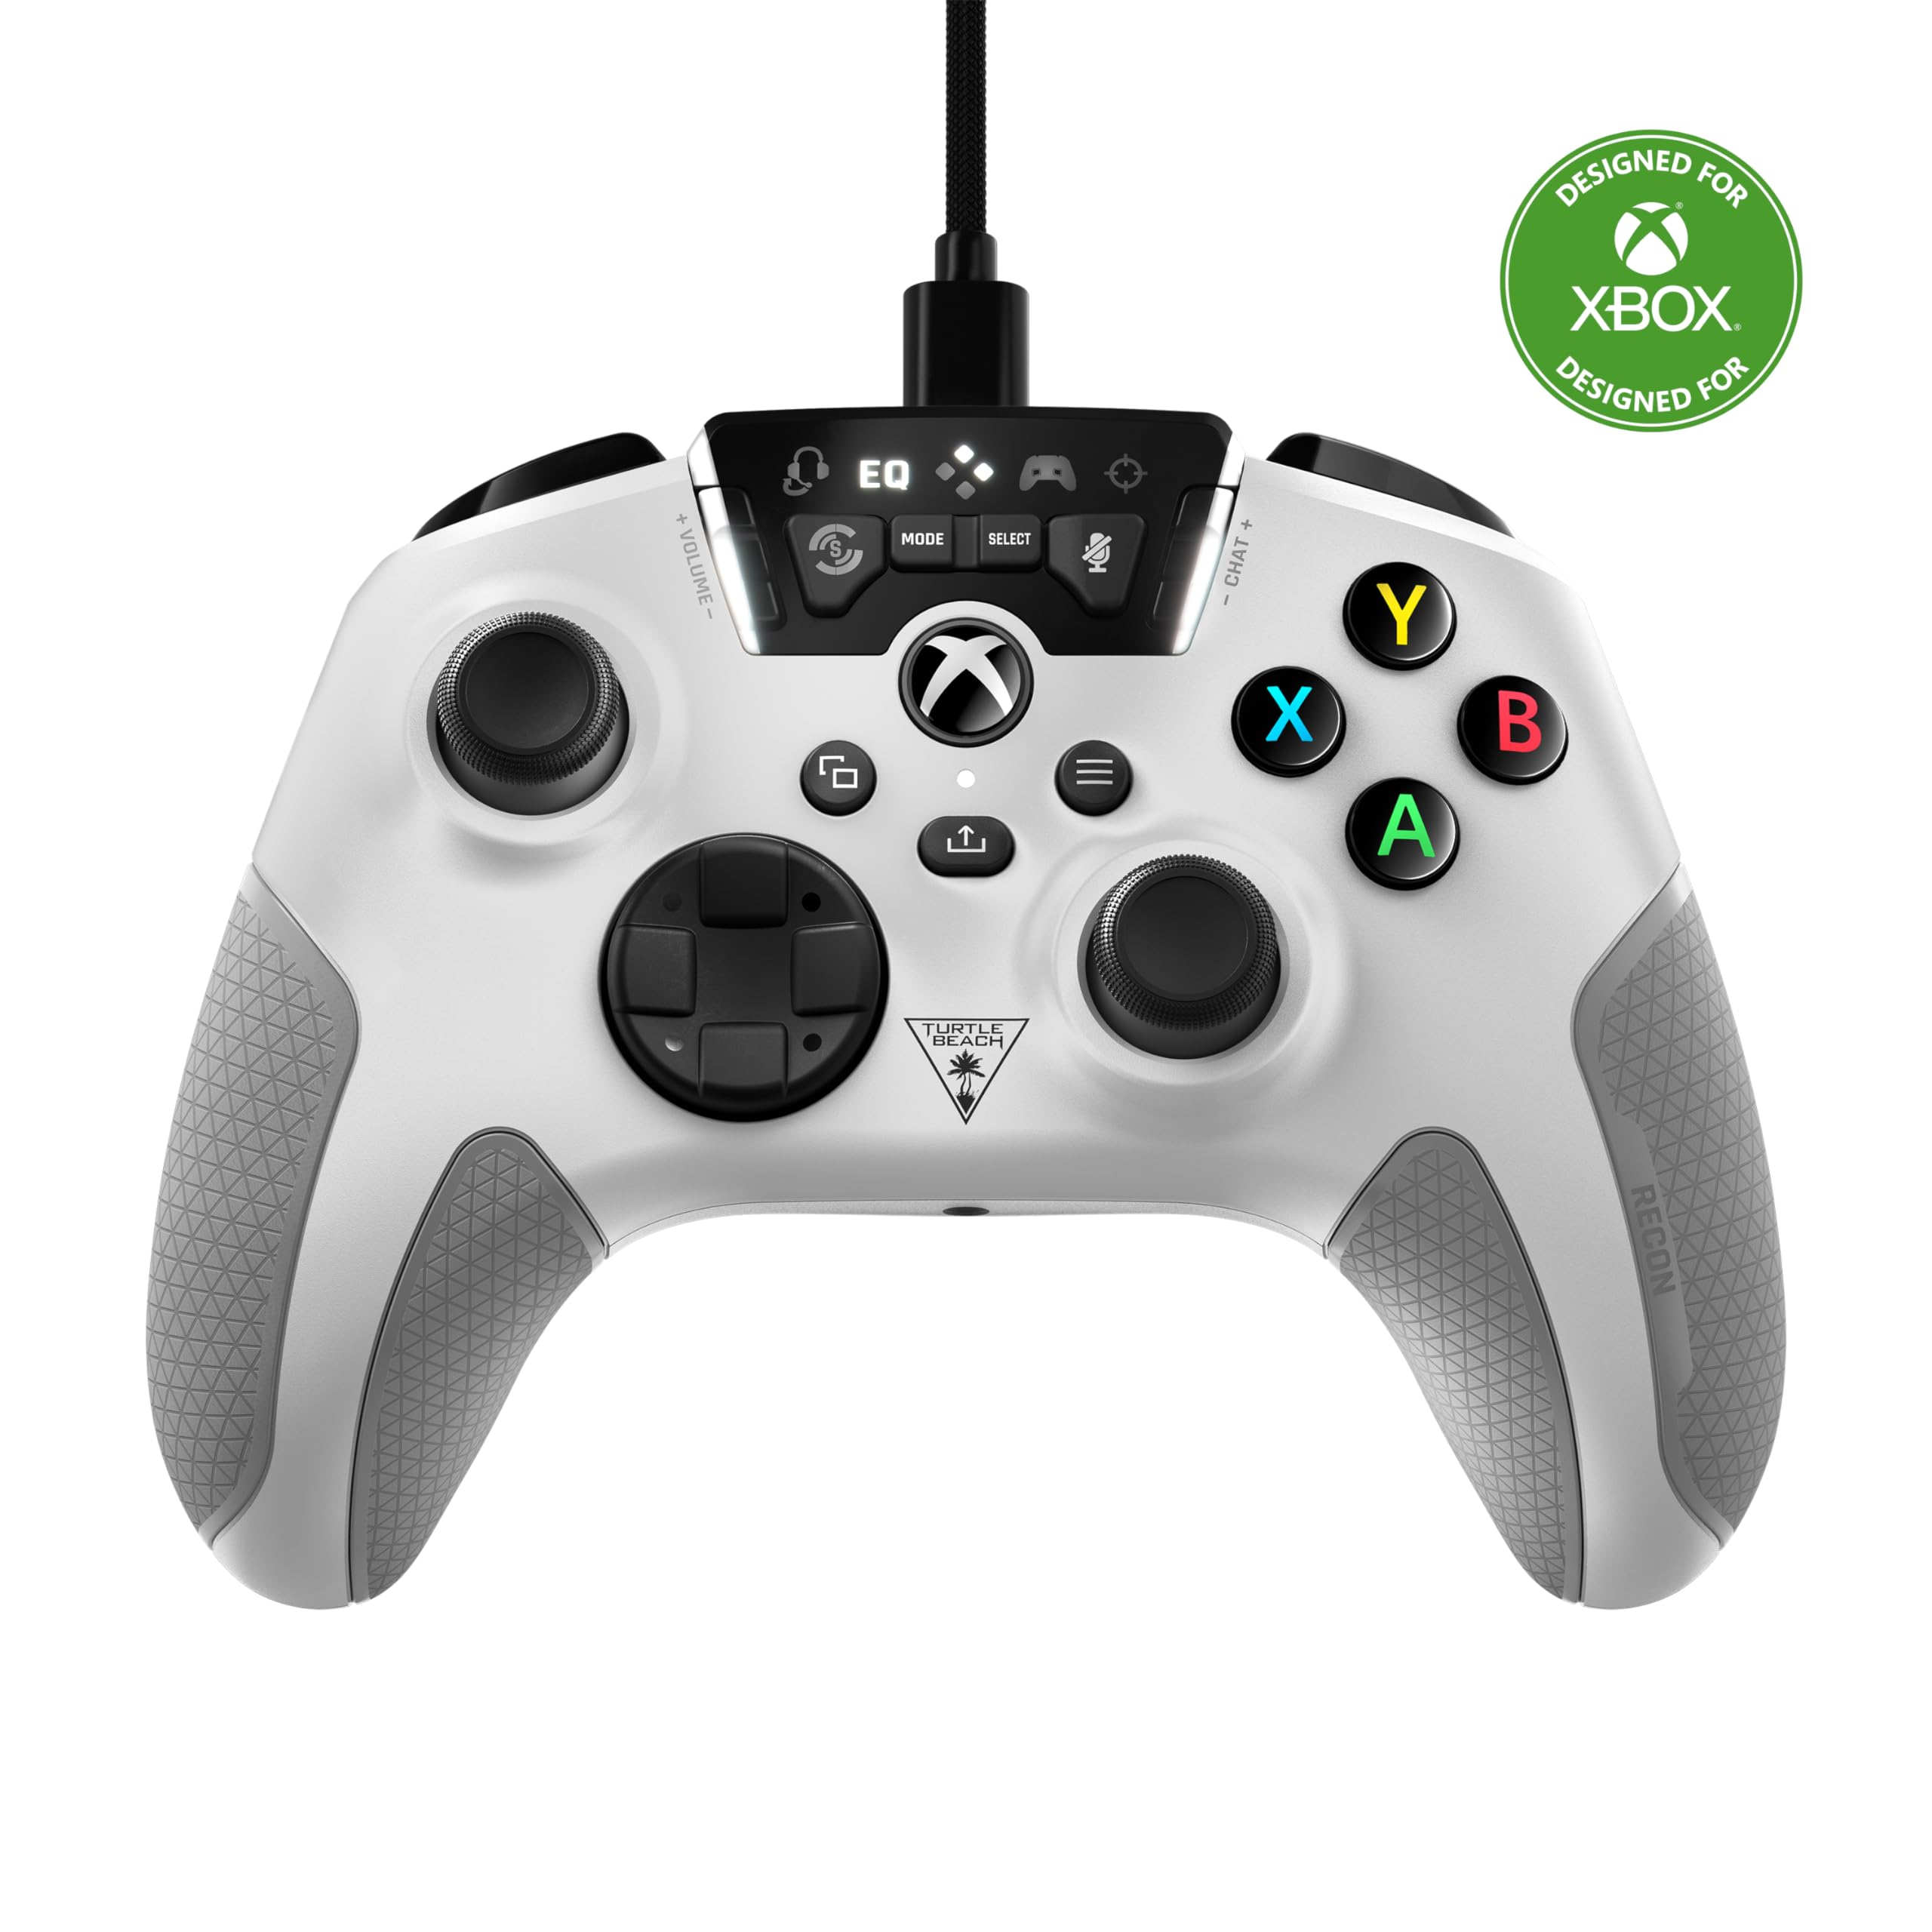 Turtle Beach Recon Controller Wired Controller for Xbox One / Series X|S & Windows w/ Remappable Buttons (White) $29.95 & More + Free Shipping